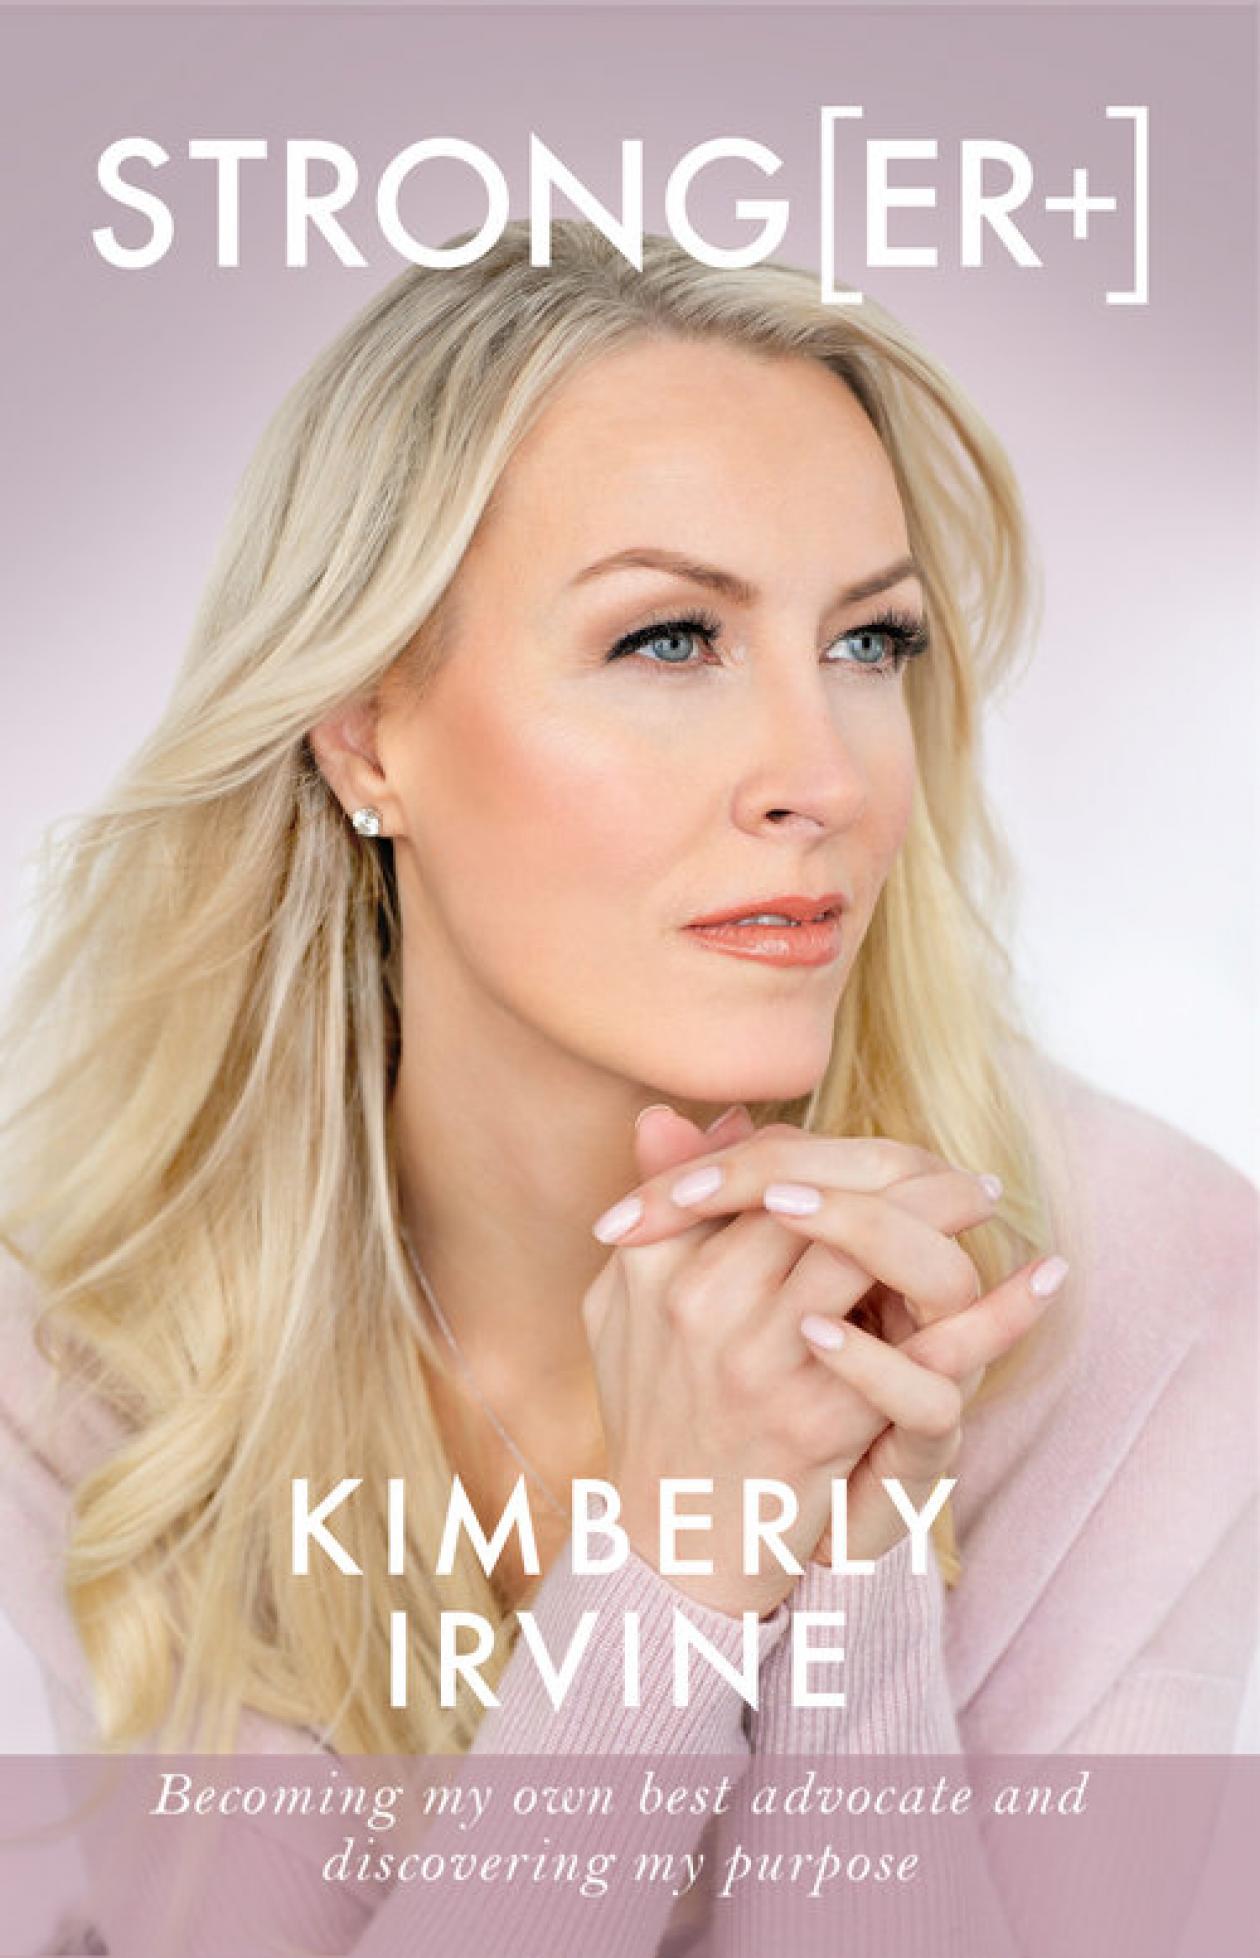 Kimberly Irvine book cover. Kimberly wearing light pink, looking slightly to the right with hands clasped beneath chin, determined look on her face.